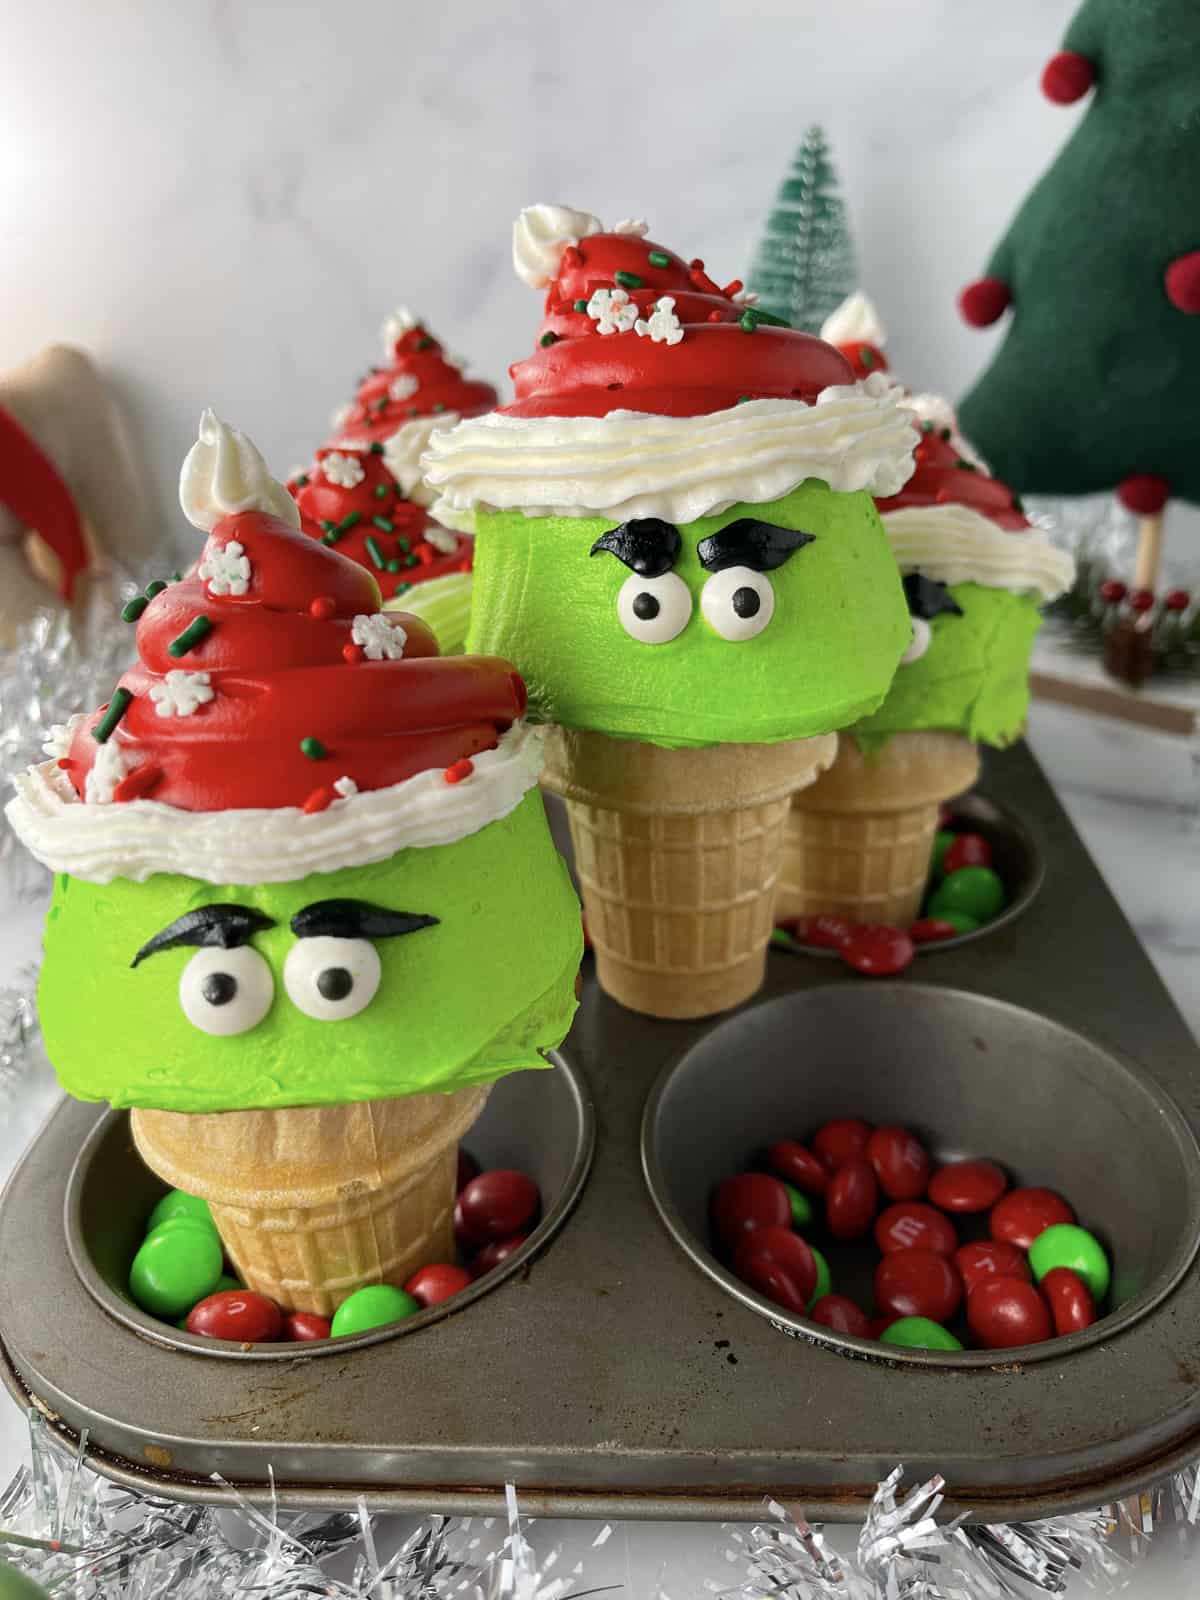 Christmas Grinch cupcakes baked in ice cream cones.